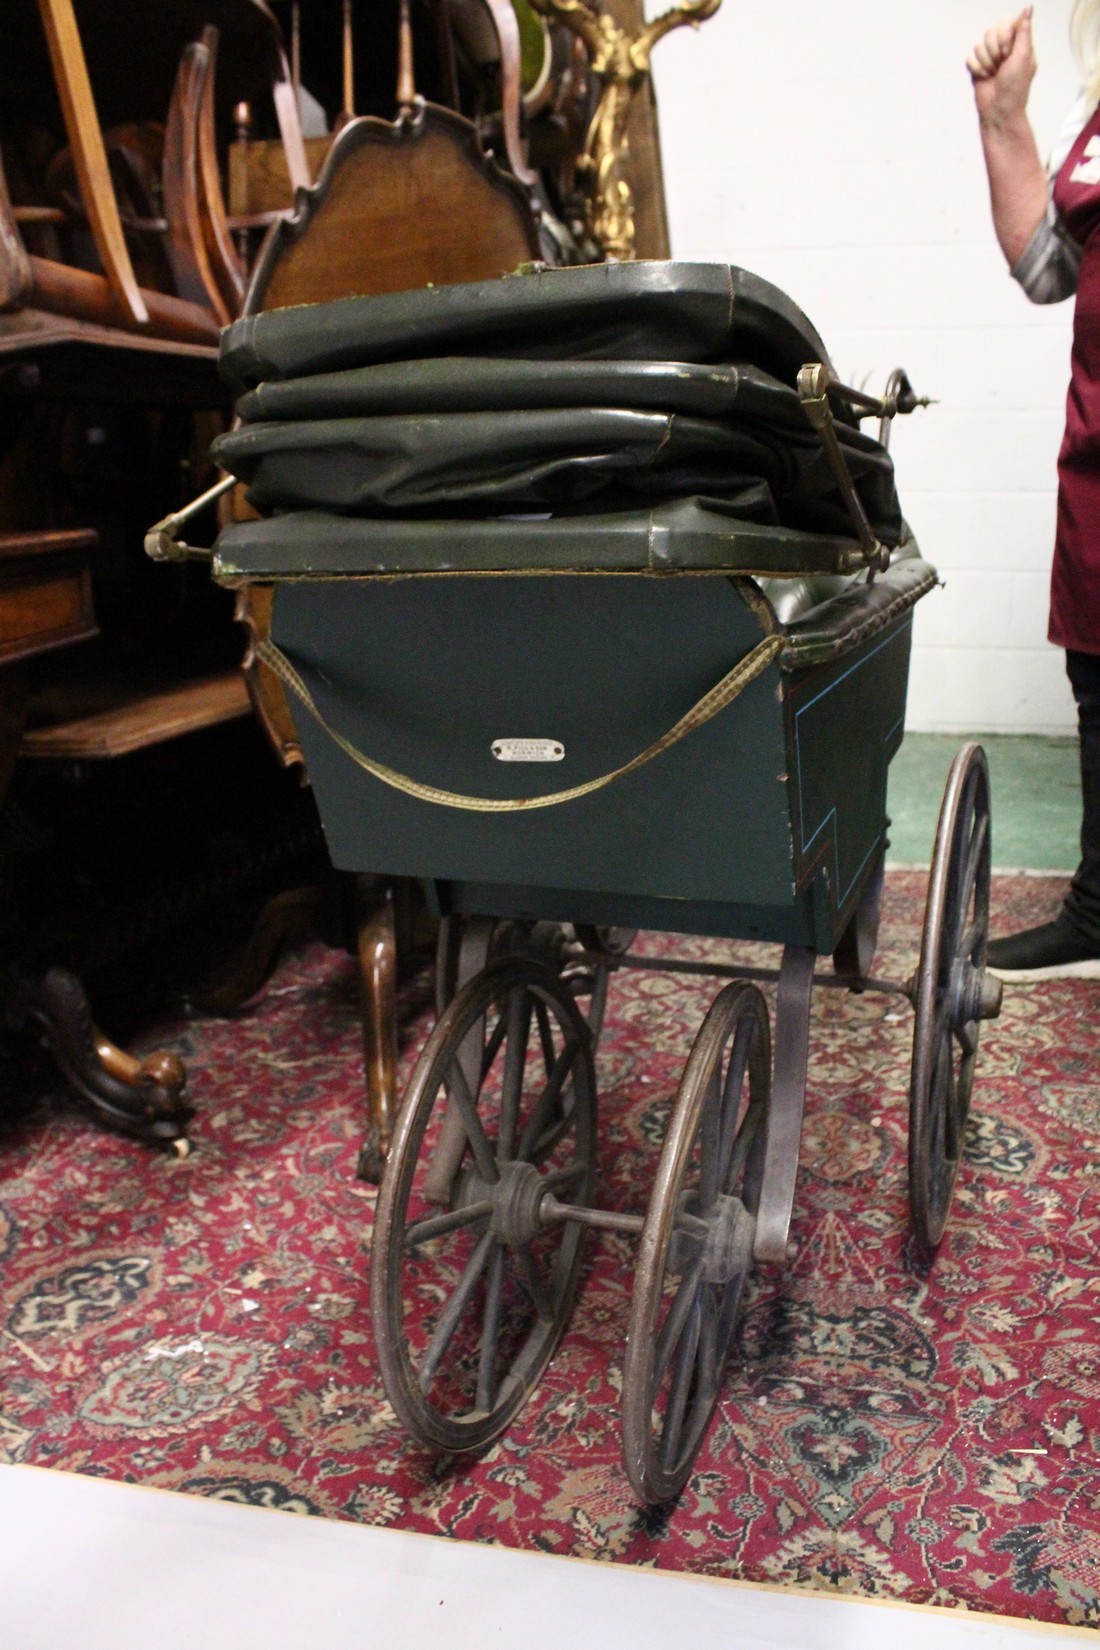 A RARE VICTORIAN METAL, WOOD AND LEATHER PRAM with folding hood, porcelain handles, wooden wheels. - Image 7 of 7